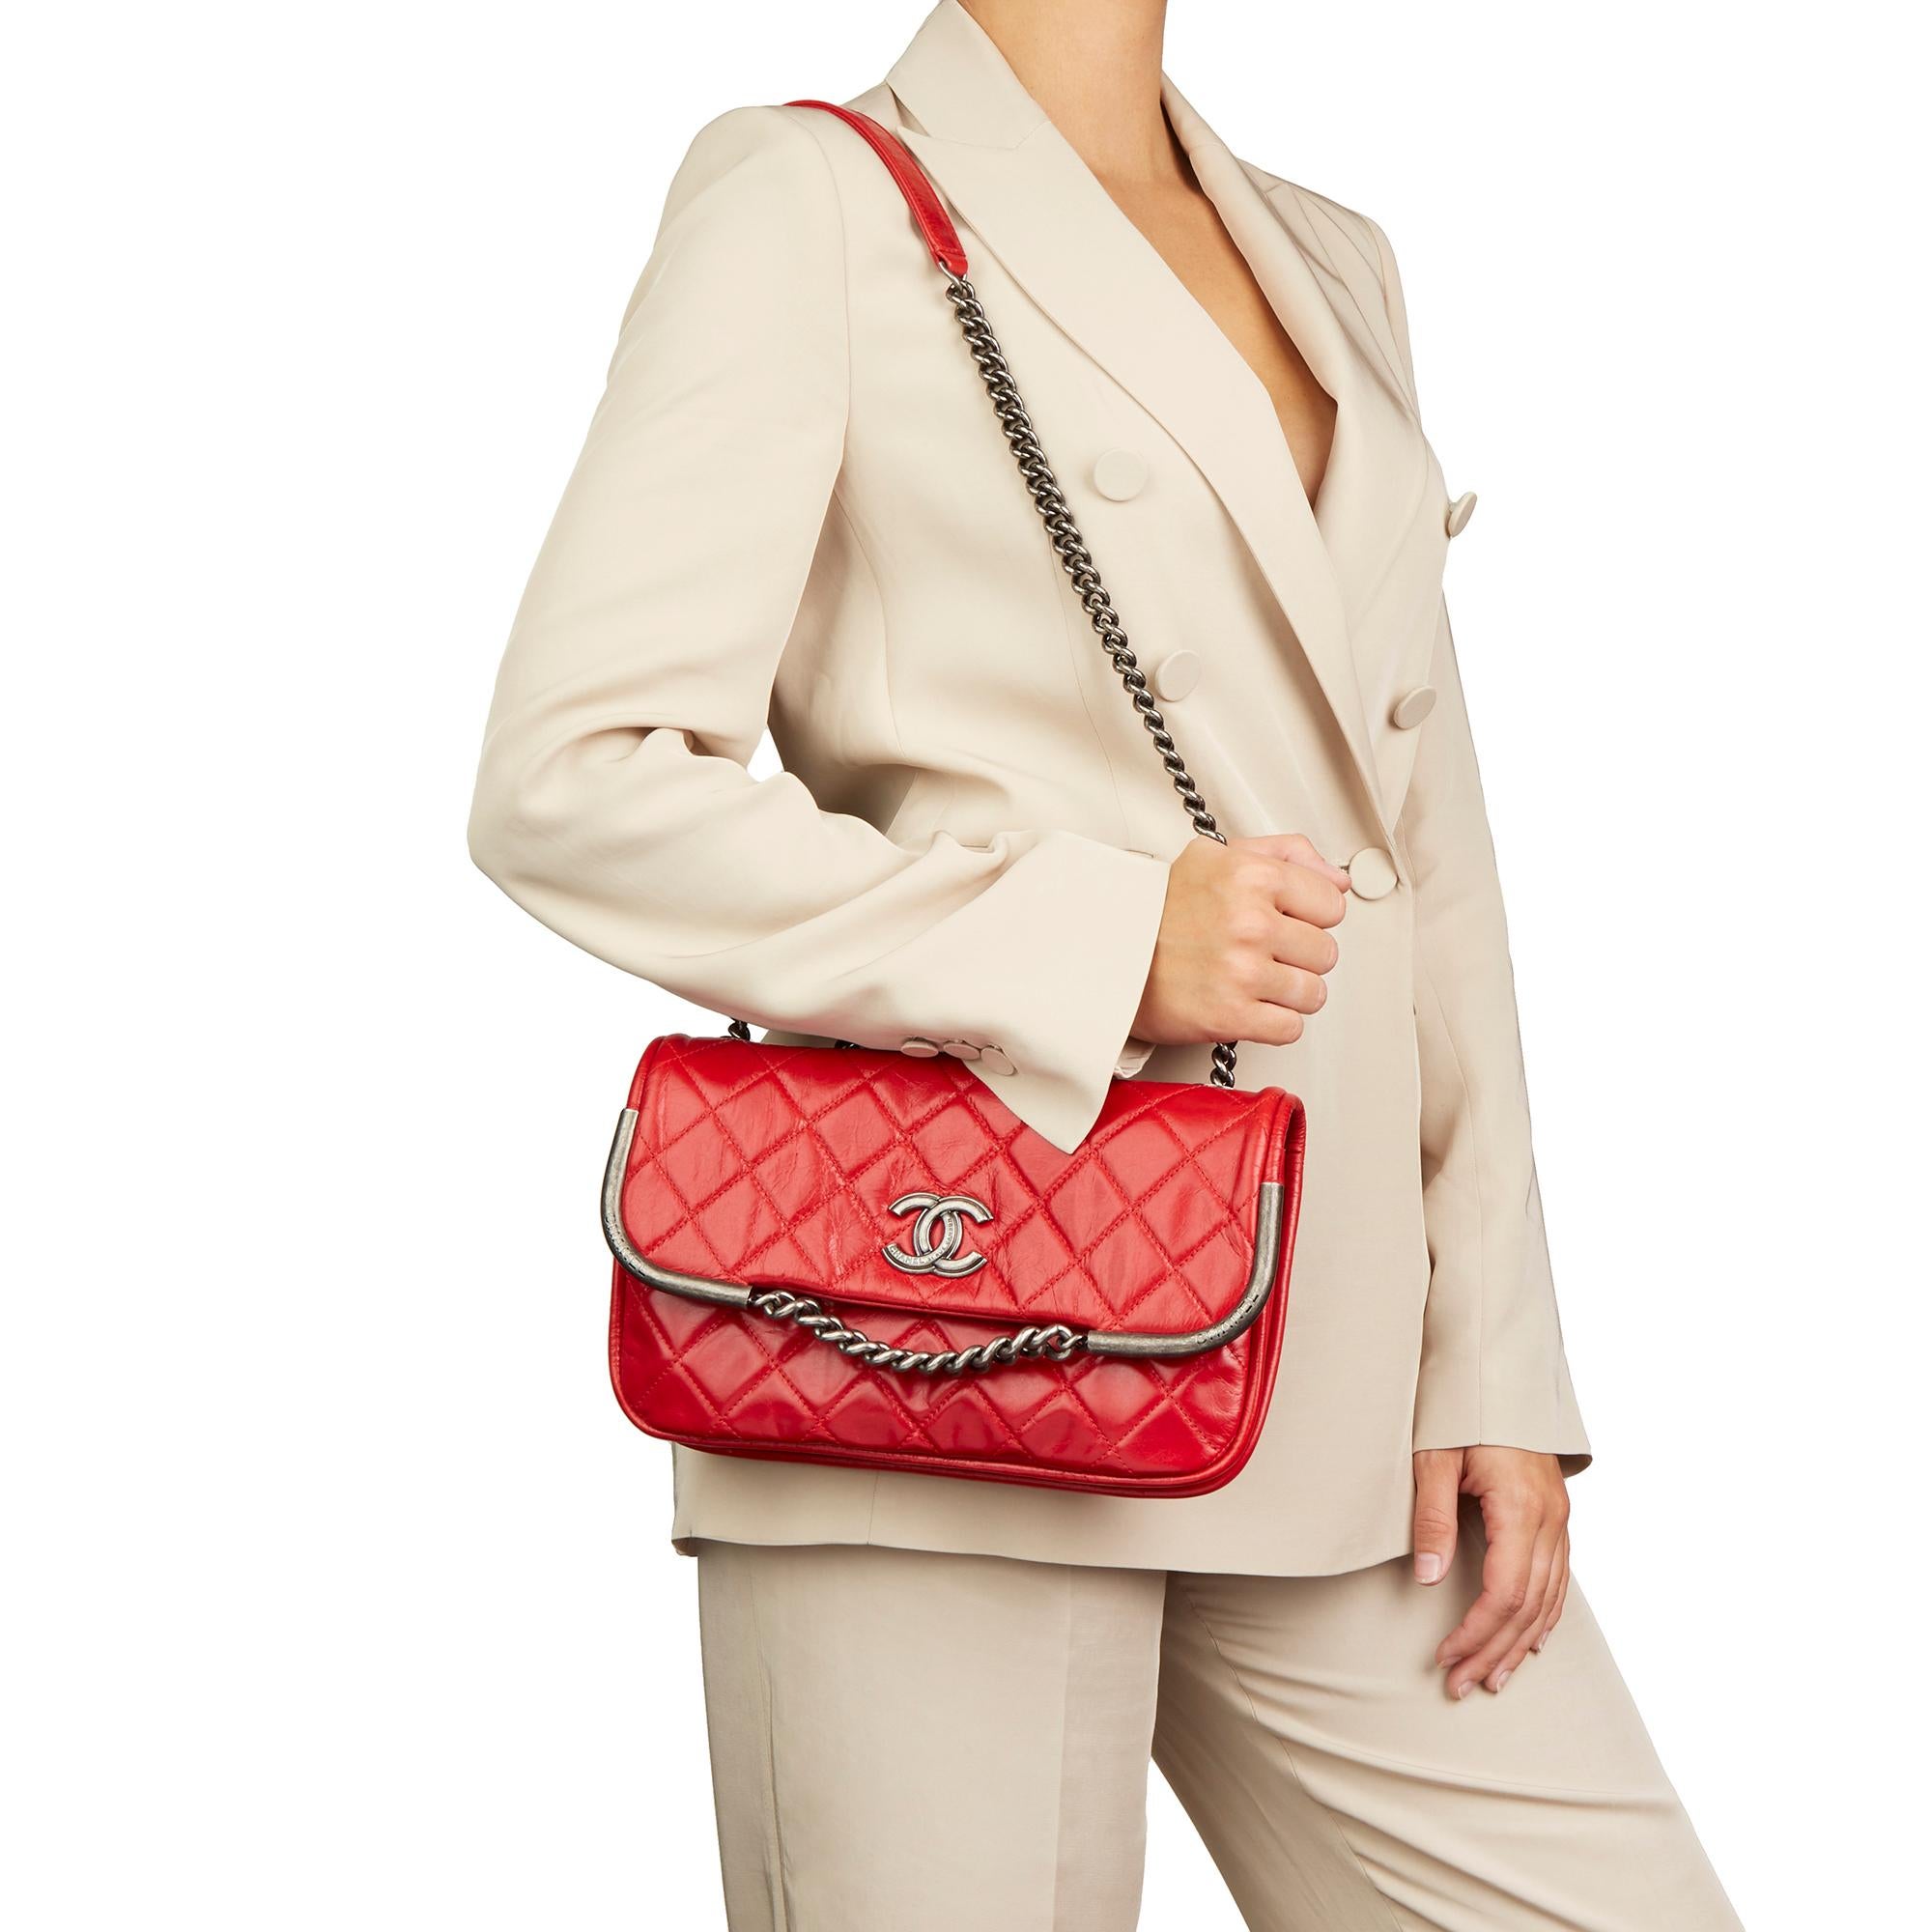 2014 Chanel Red Quilted Aged Calfskin Leather Single Flap Bag 8